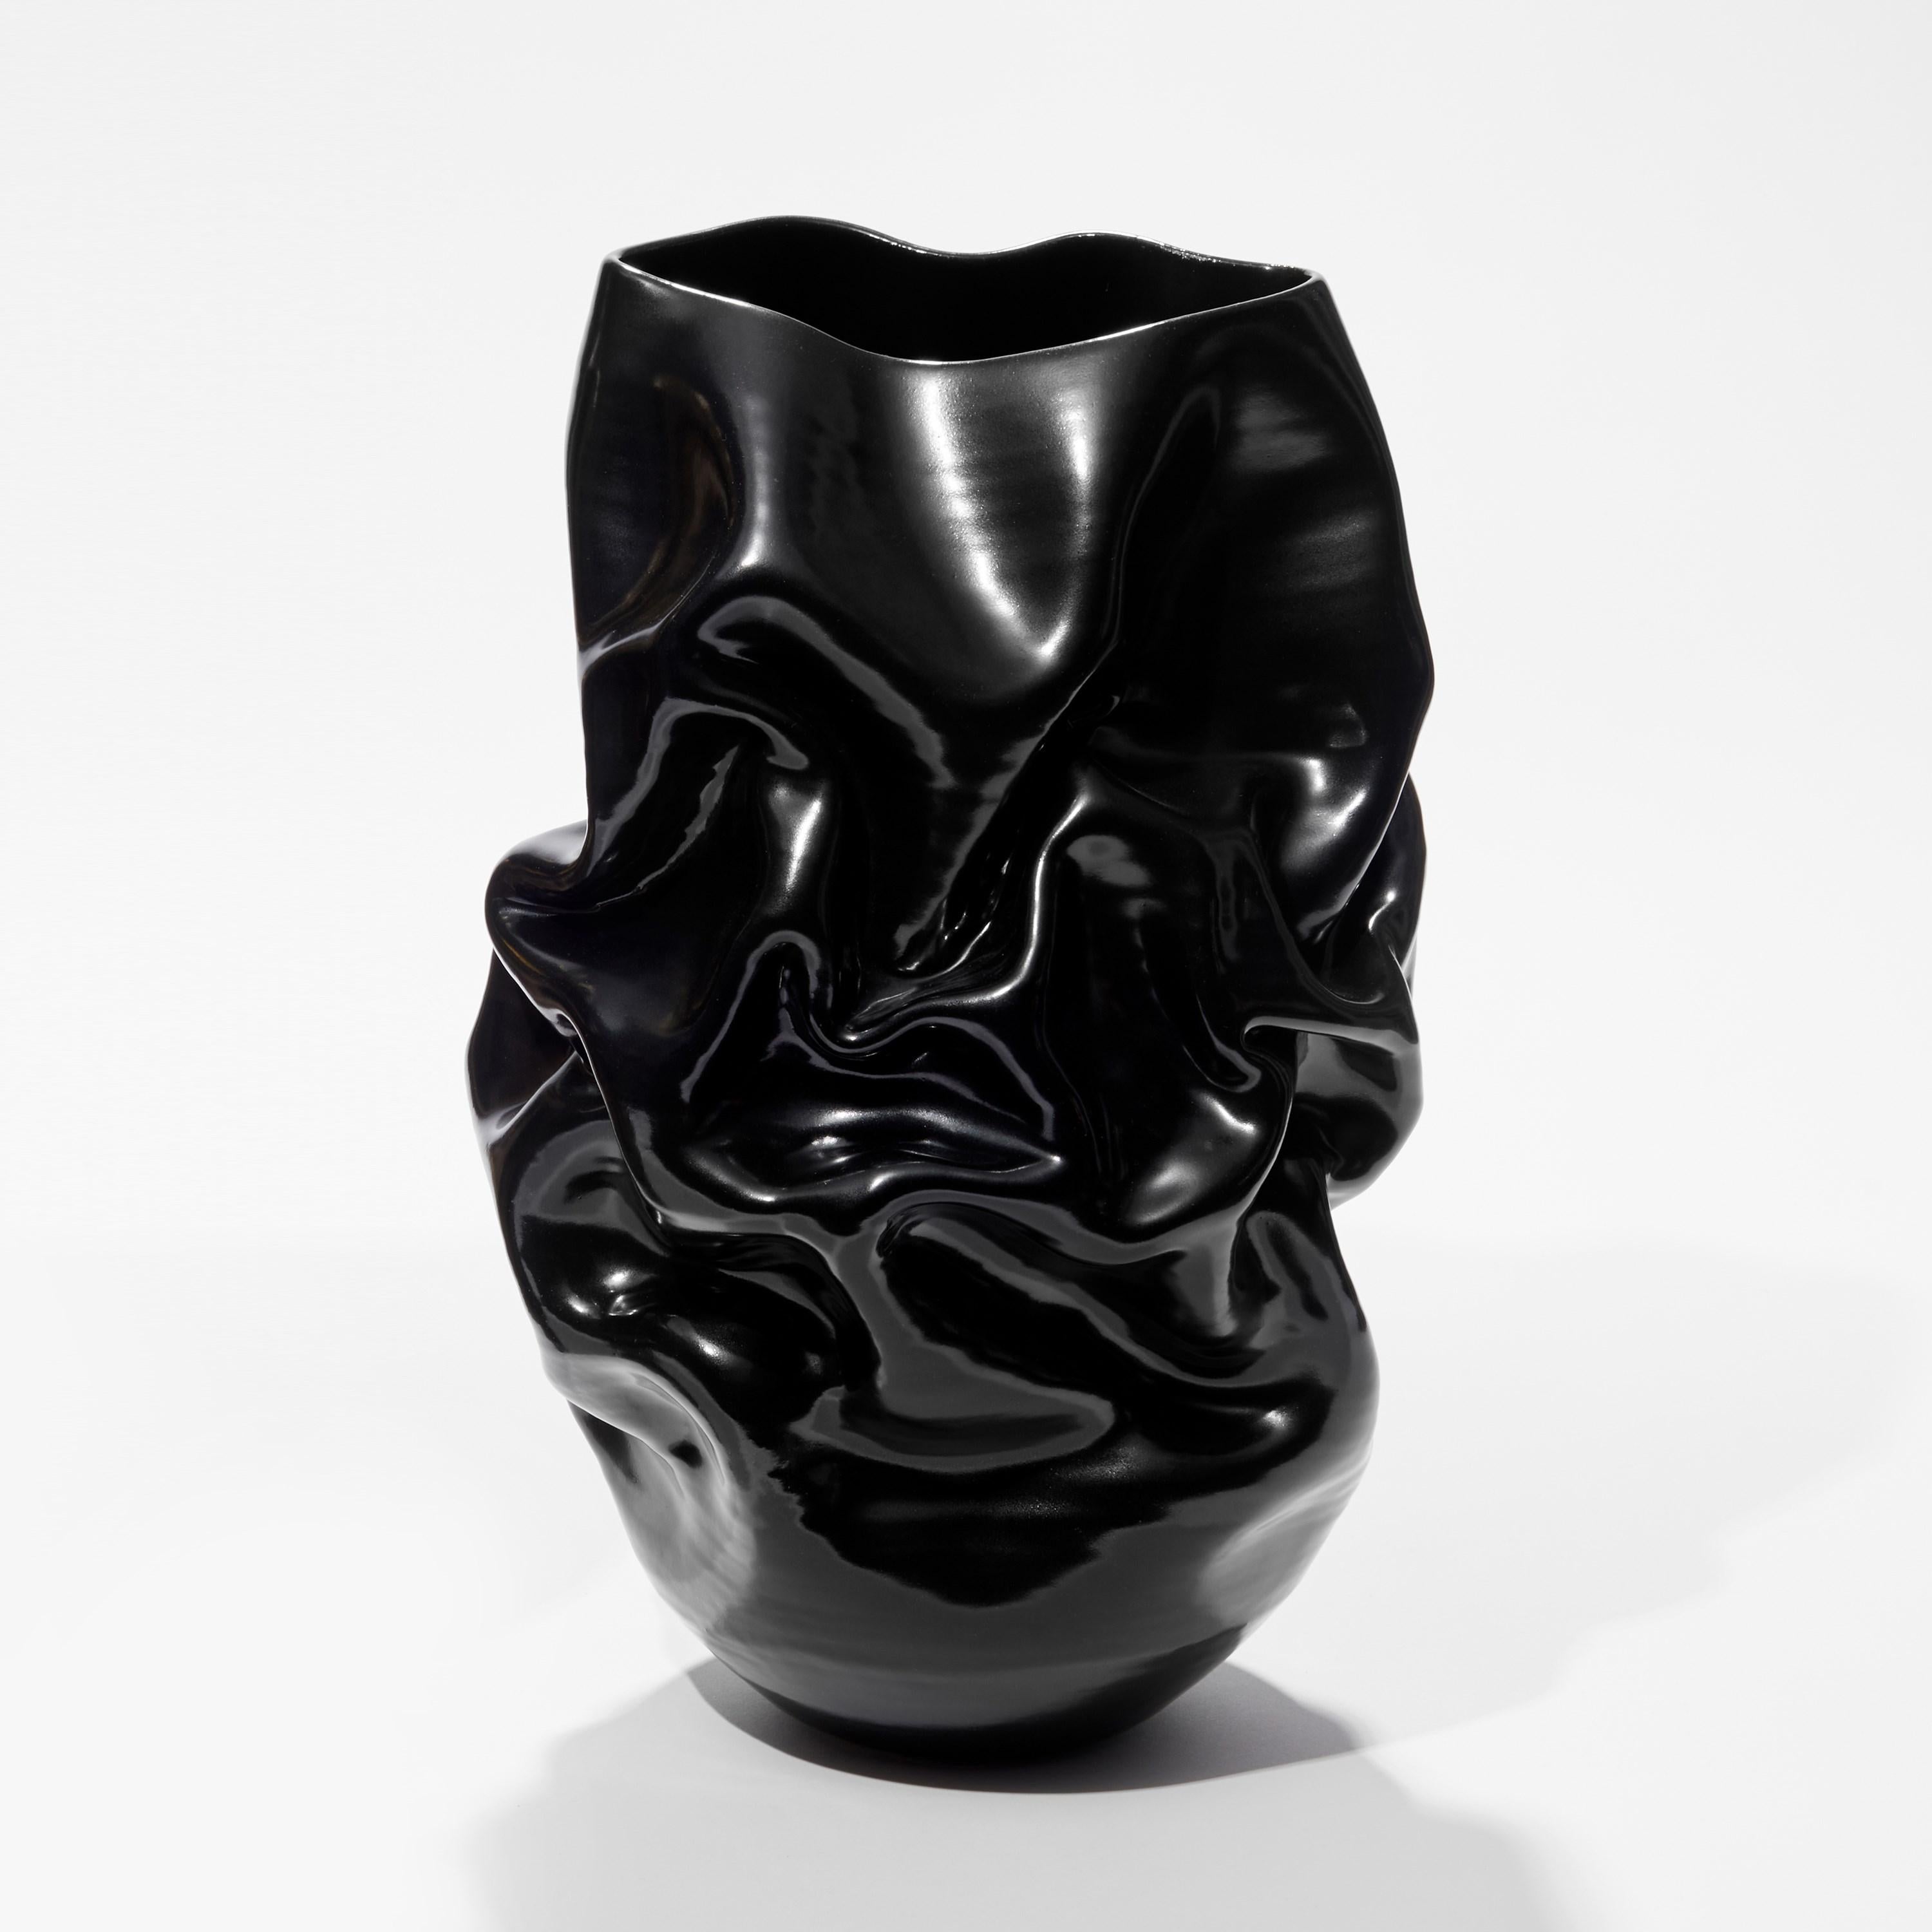 ‘Tall Black Crumpled Form No 94’ is a unique sculptural vessel by the British artist, Nicholas Arroyave-Portela.

Nicholas Arroyave-Portela’s professional ceramic practise began in 1994. After 20 years based in London, he moved and set up his